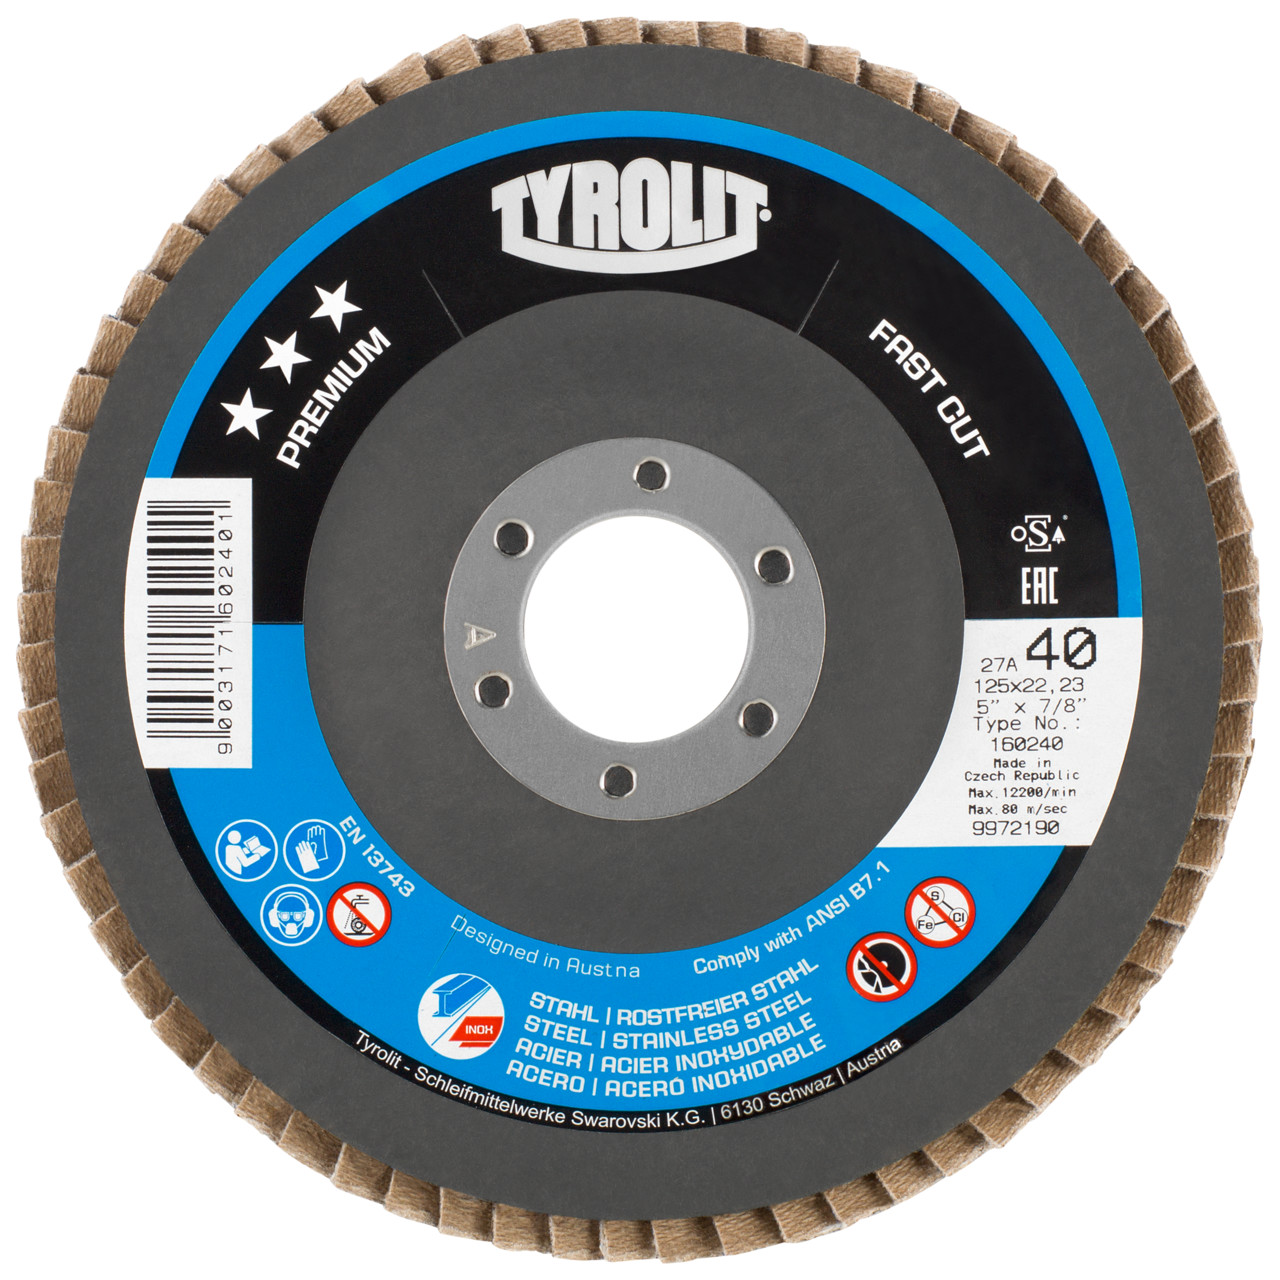 Tyrolit Serrated lock washer DxH 125x22.2 FASTCUT for steel &amp; stainless steel, P80, shape: 28A - straight version (glass fibre carrier body version), Art. 160256